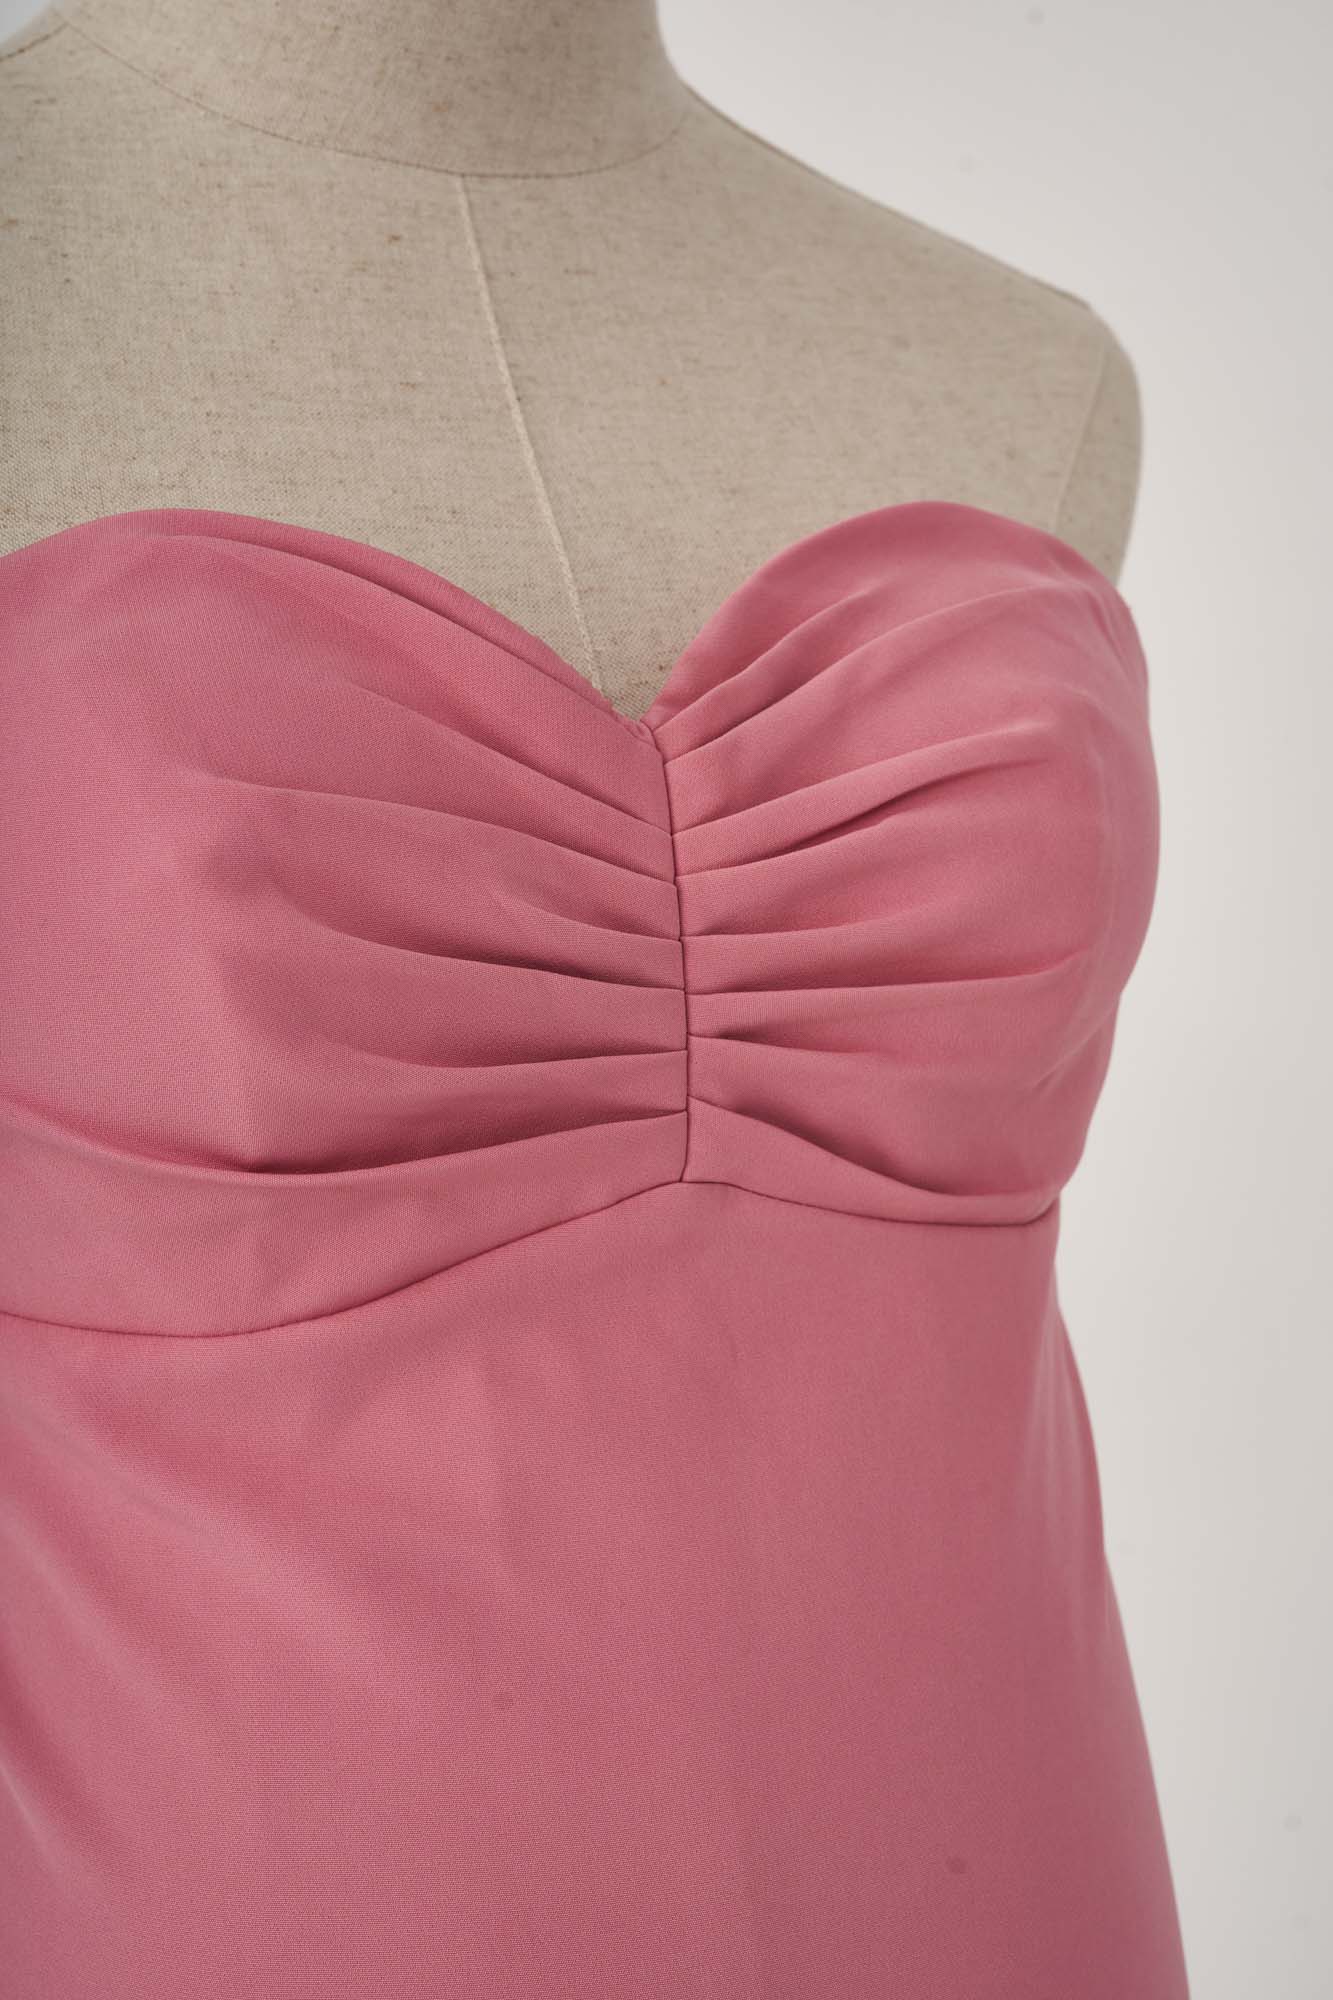 Detailed photos of breasts in pink cake maternity dress